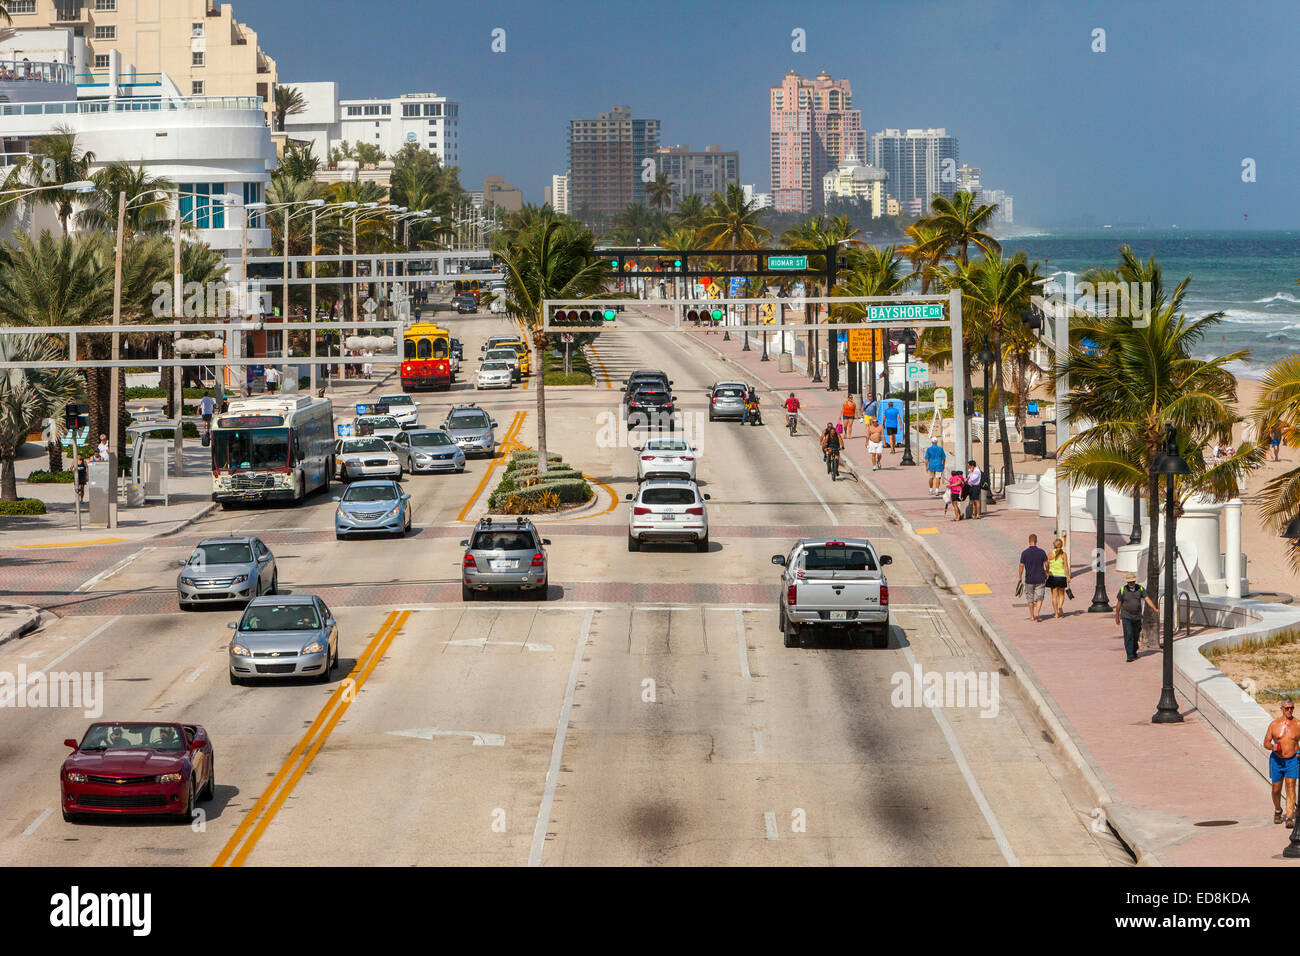 Ft. Lauderdale, Florida.  Atlantic Blvd., Florida State Highway A1A. Stock Photo